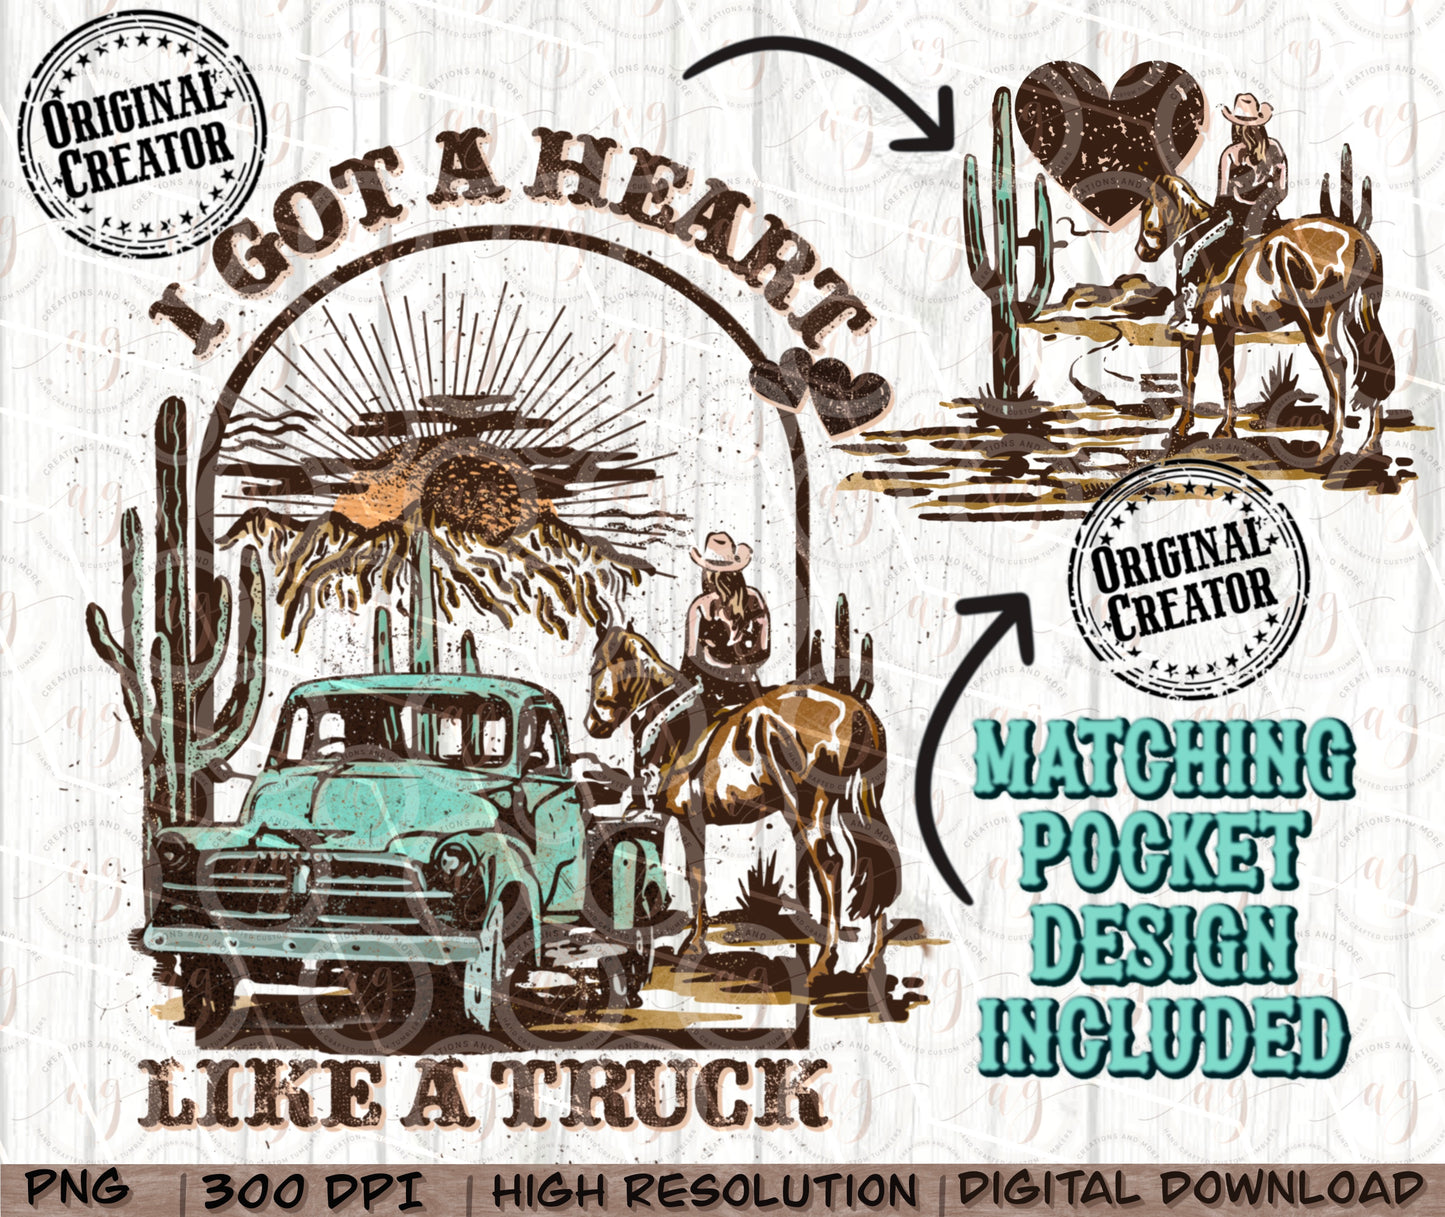 Heart Like A Truck Png, Western Sunset Cowgirl, Pocket Set PNG